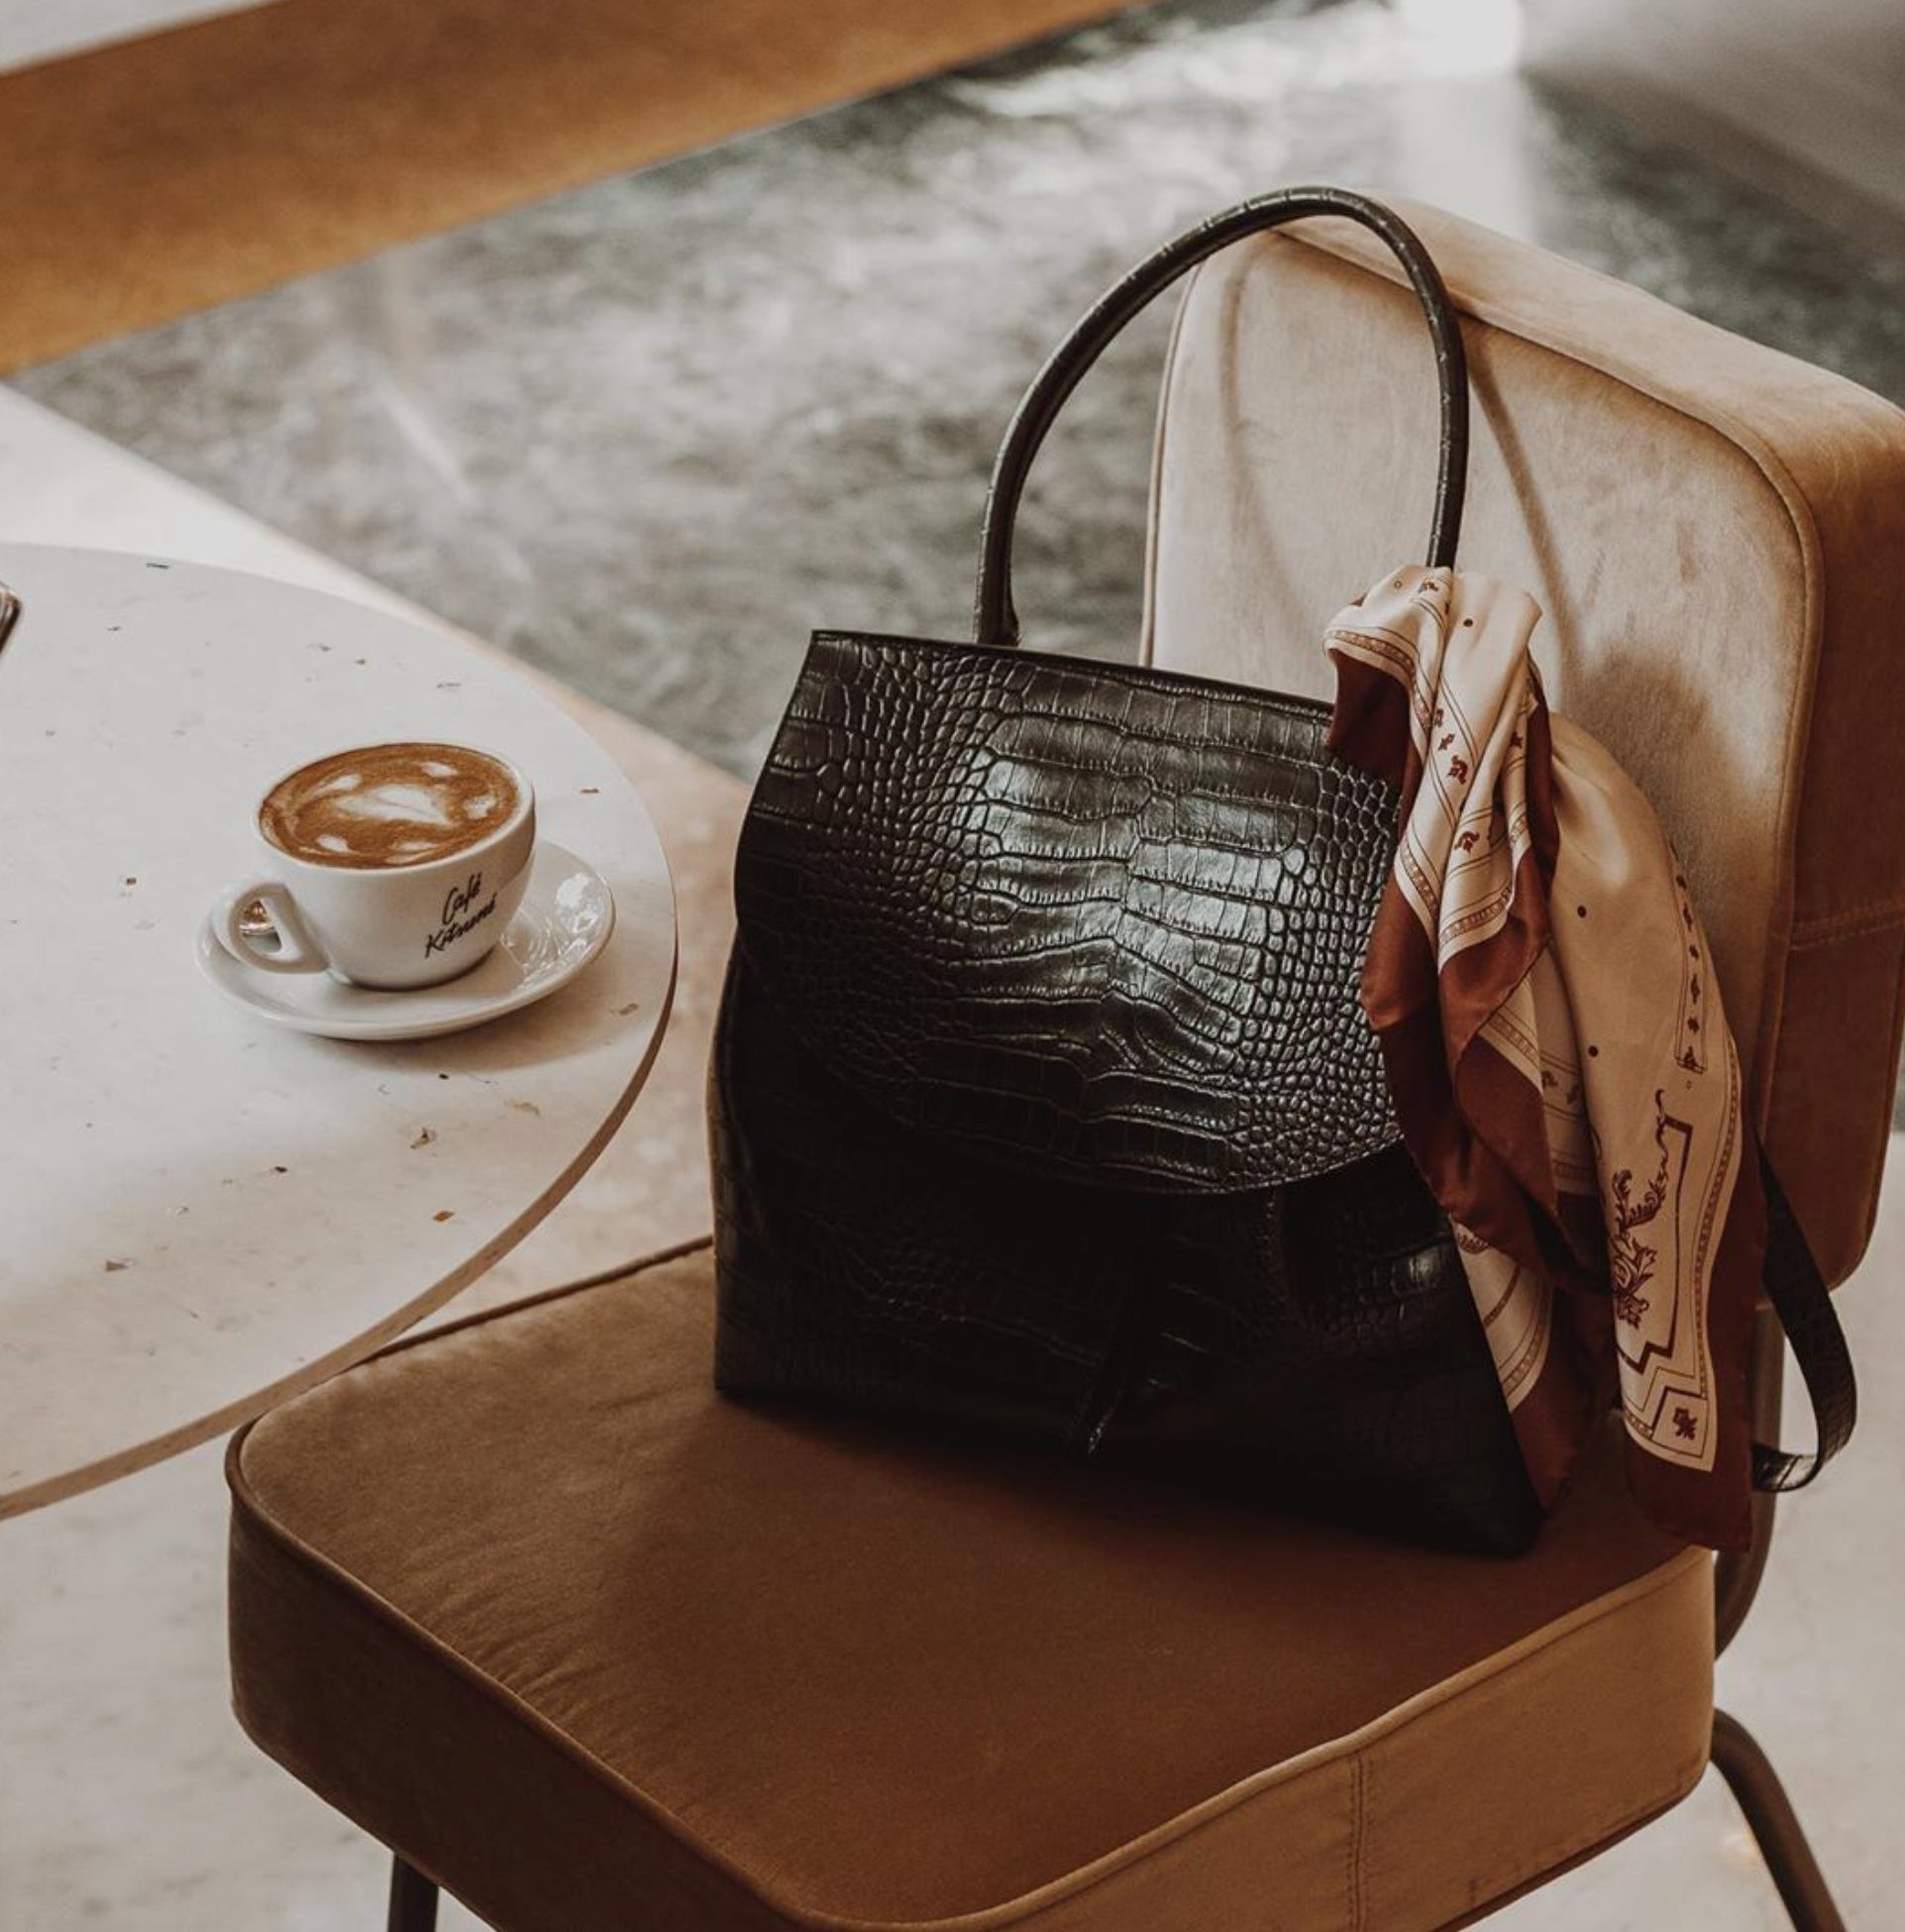 Woven Bags - Italian Leather Handbags - The Leather Mob